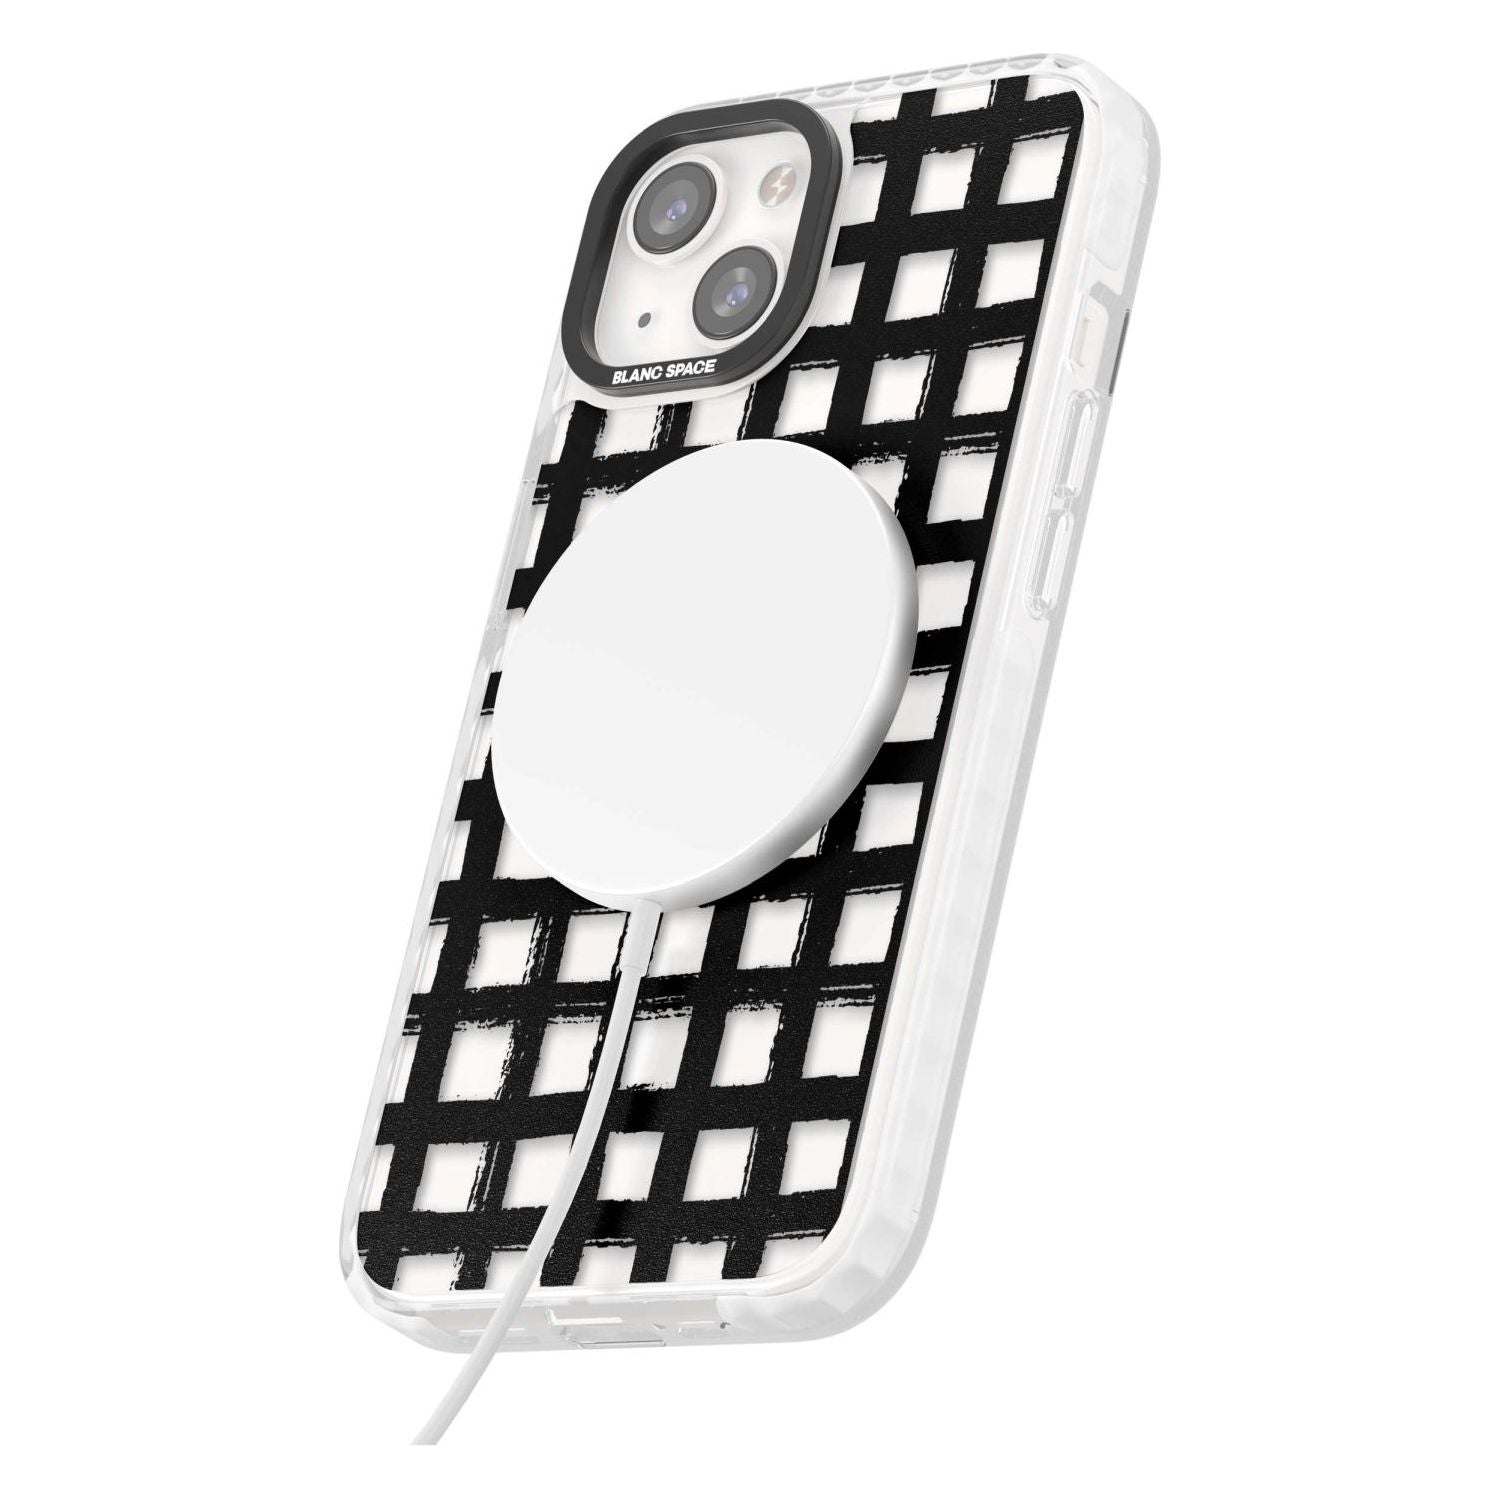 Messy Black Grid - Clear Phone Case iPhone 15 Pro Max / Black Impact Case,iPhone 15 Plus / Black Impact Case,iPhone 15 Pro / Black Impact Case,iPhone 15 / Black Impact Case,iPhone 15 Pro Max / Impact Case,iPhone 15 Plus / Impact Case,iPhone 15 Pro / Impact Case,iPhone 15 / Impact Case,iPhone 15 Pro Max / Magsafe Black Impact Case,iPhone 15 Plus / Magsafe Black Impact Case,iPhone 15 Pro / Magsafe Black Impact Case,iPhone 15 / Magsafe Black Impact Case,iPhone 14 Pro Max / Black Impact Case,iPhone 14 Plus / Bl